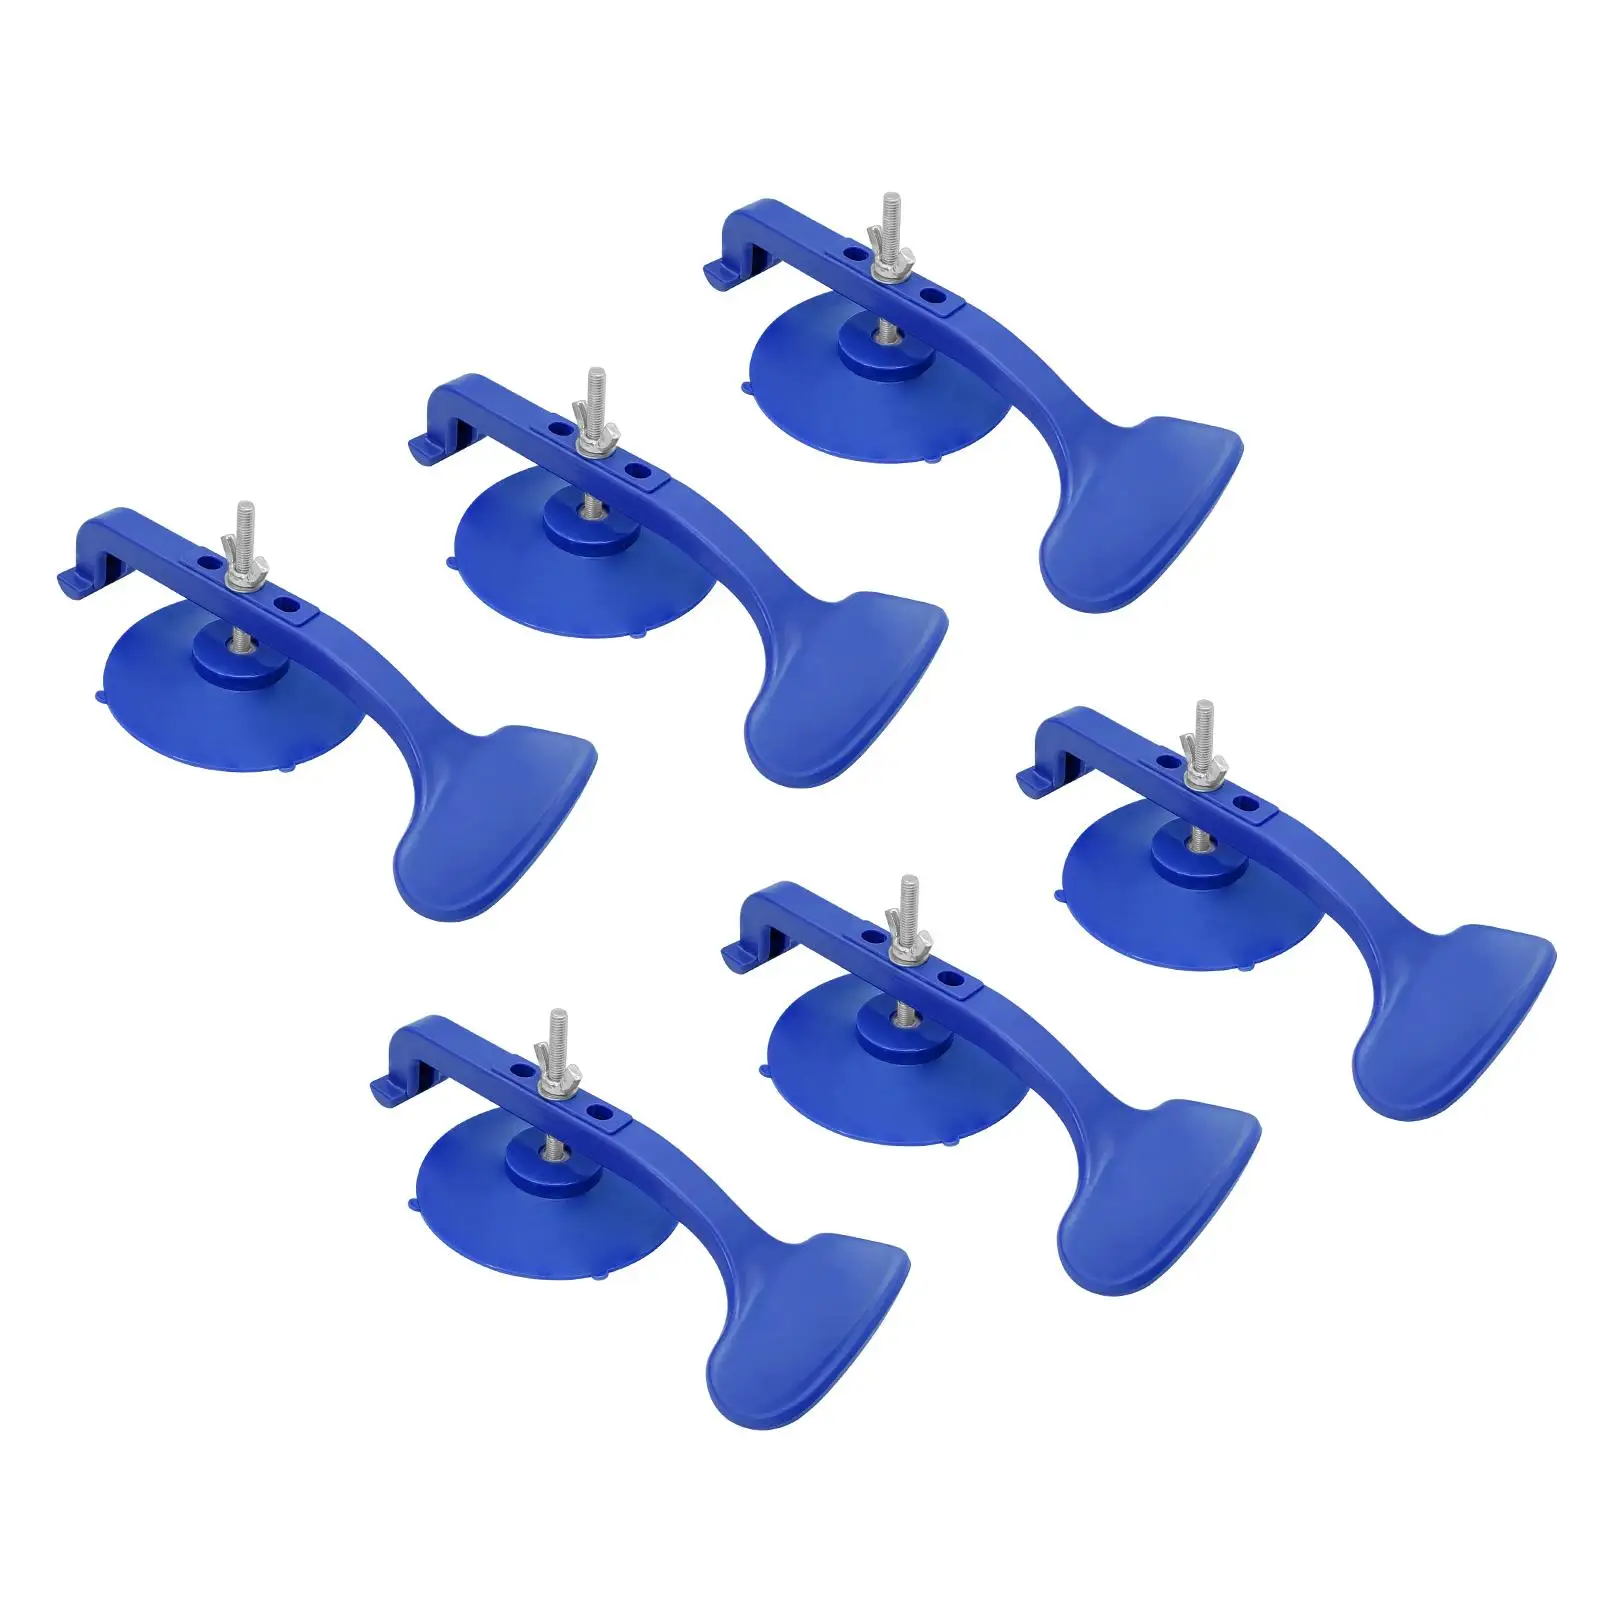 6x High Performance Suction Clamp Set for Convertible Glass Windshield